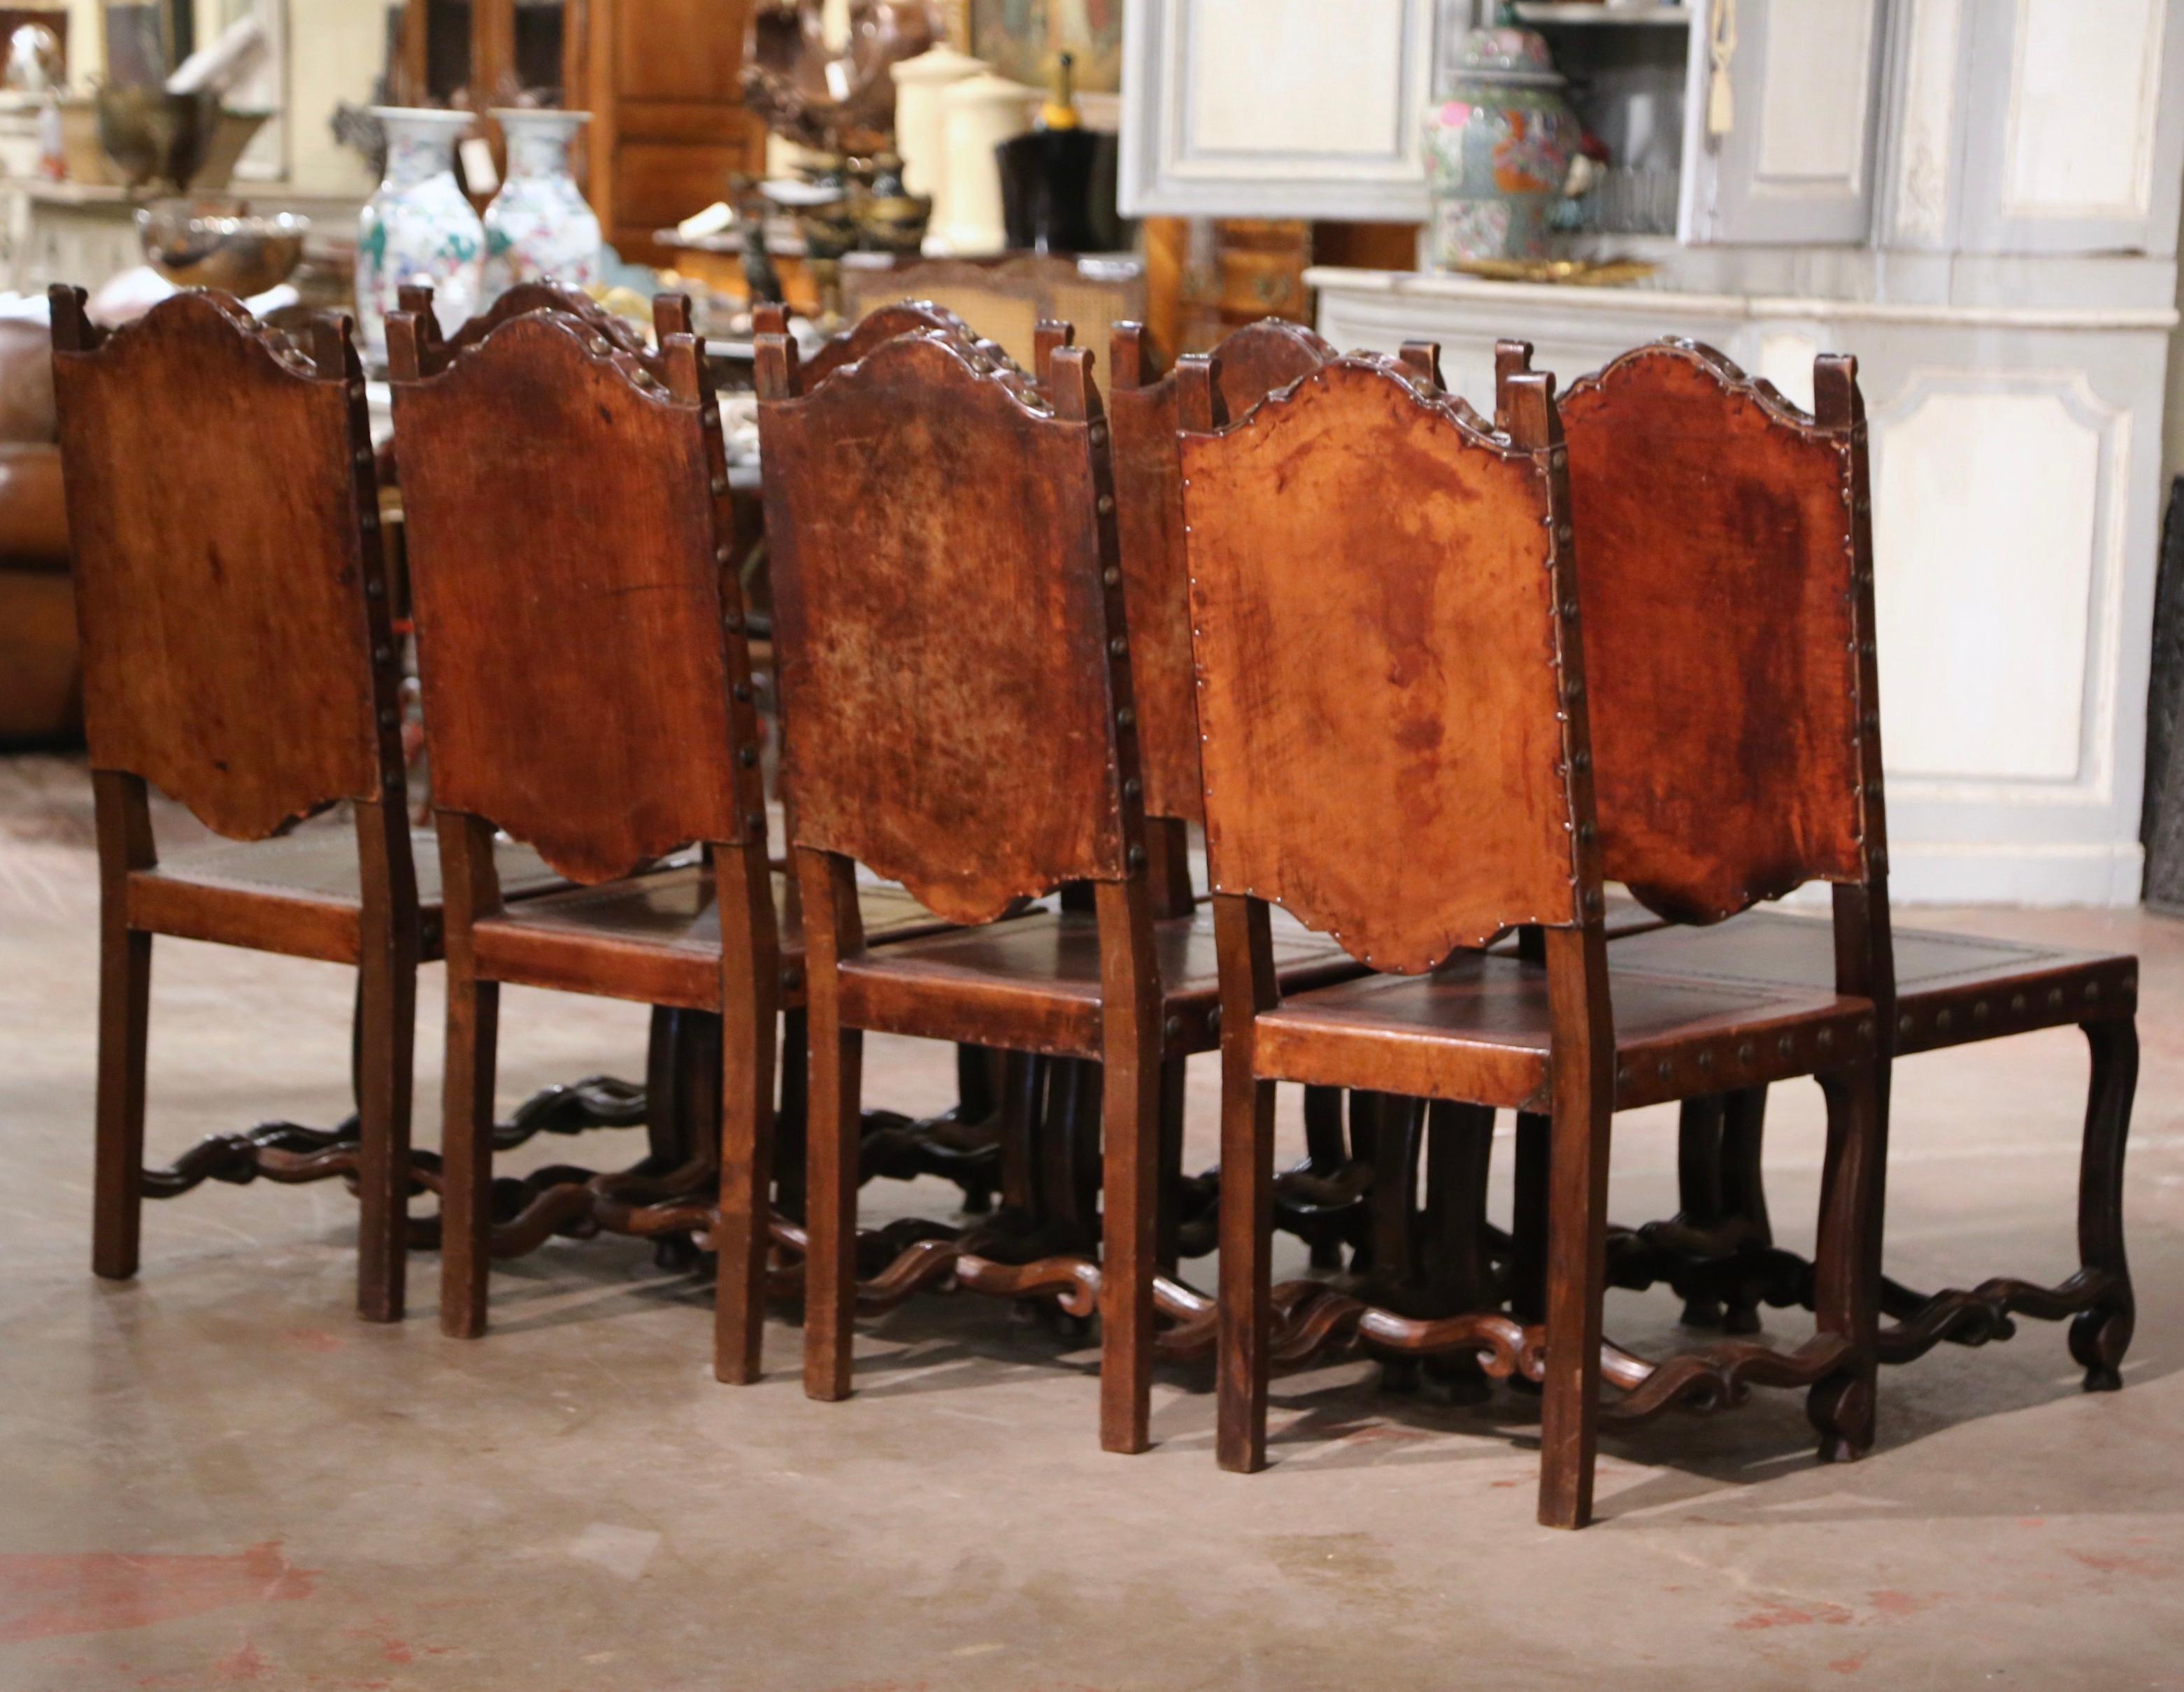  19th Century Spanish Carved Walnut Chairs with Embossed Leather, Set of Eight 4